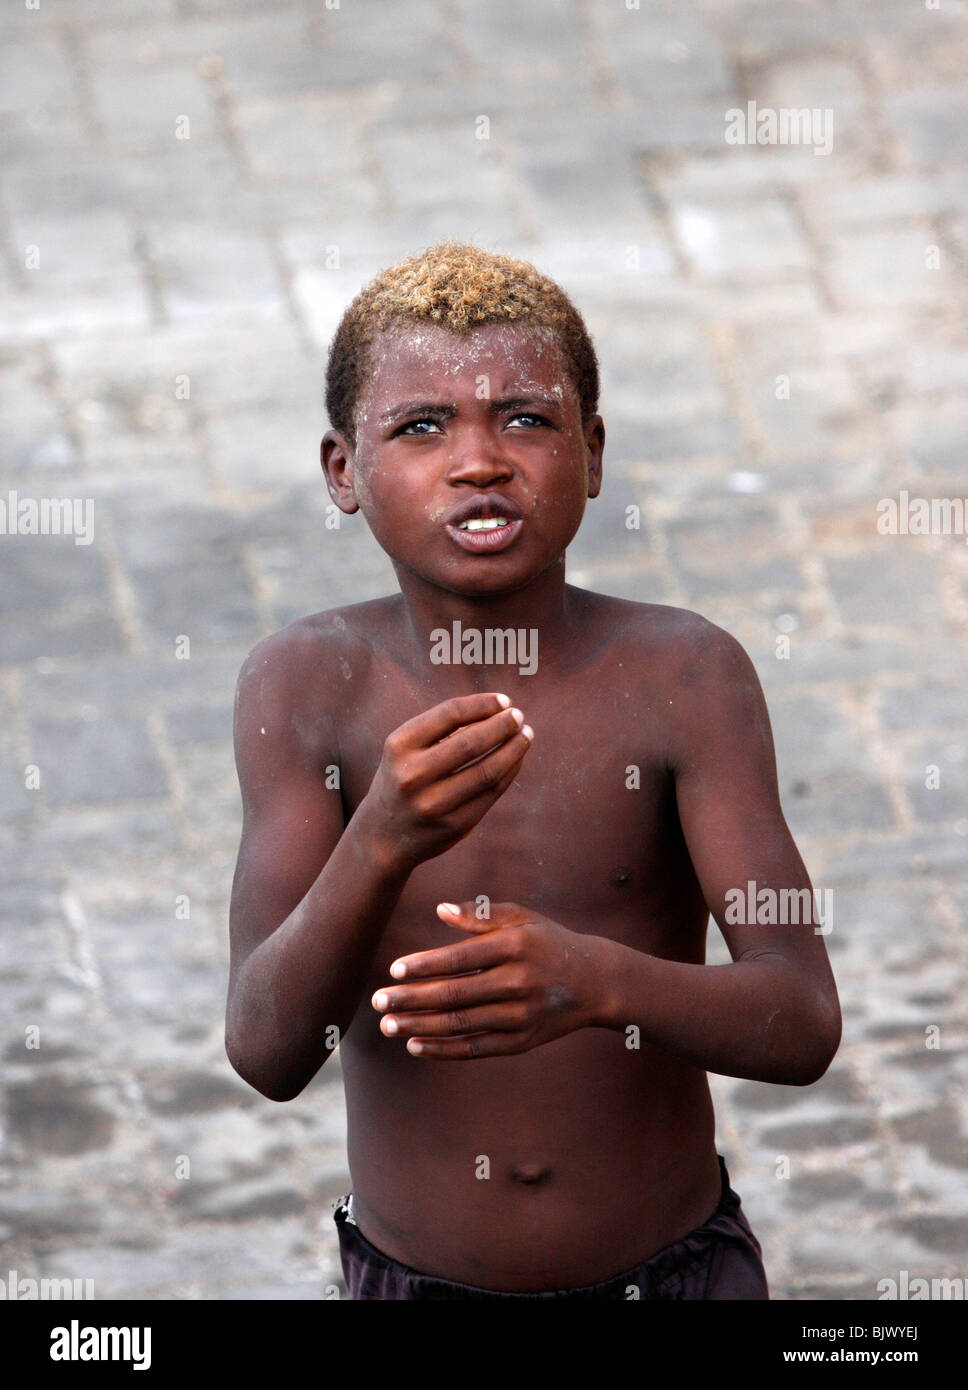 hungry poor african street kid begging for food,madagascar,africa Stock Photo